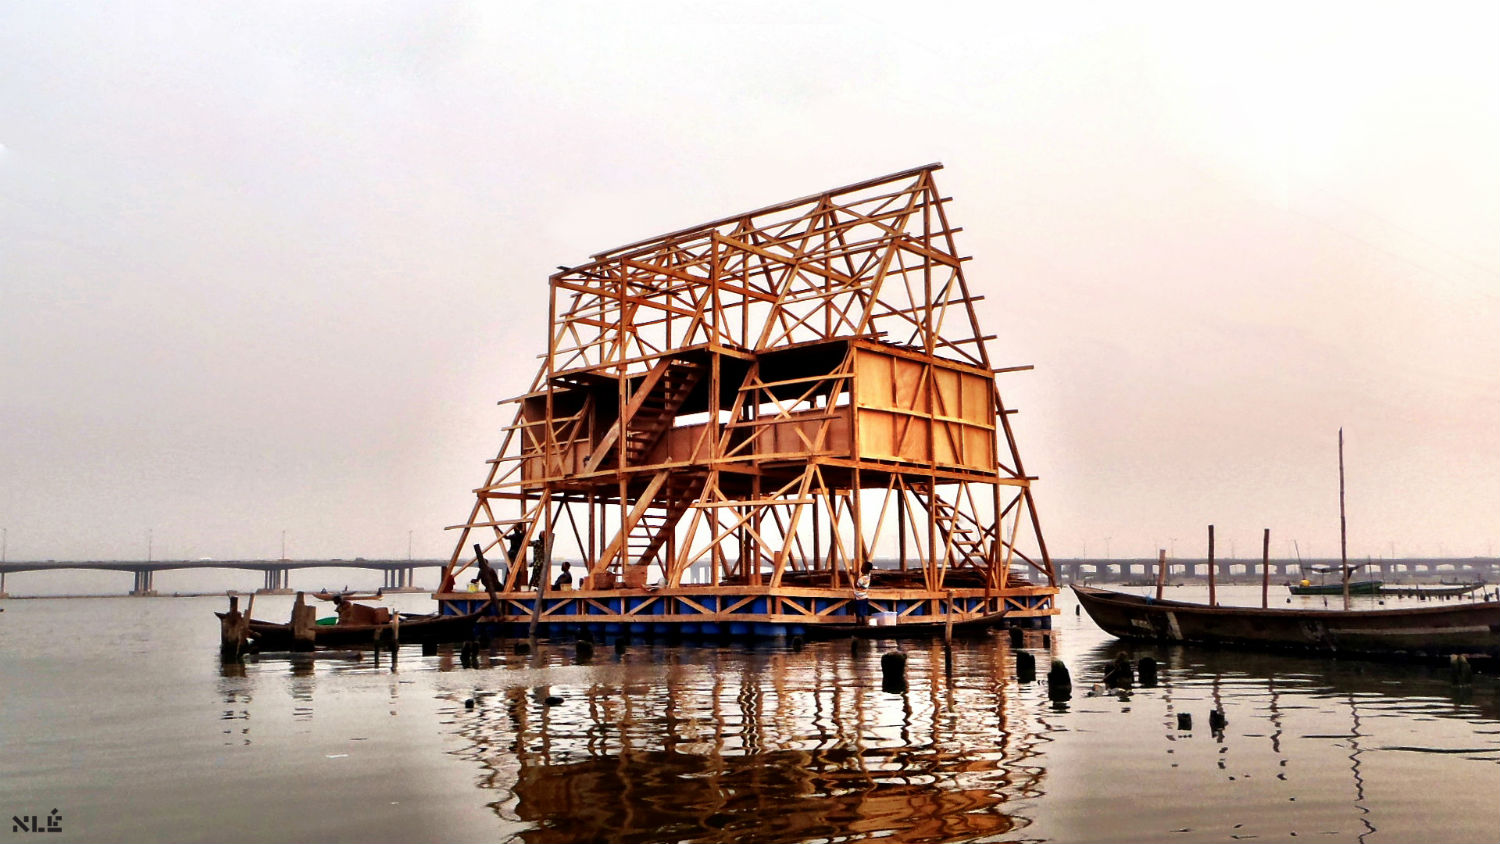 Makoko floating school, here seen mid-build. The triangular structure creates a low centre of gravity, meaning it can accommodate three storeys and 100 people without becoming unstable. It is built from local bamboo and offcuts from a local sawmill
